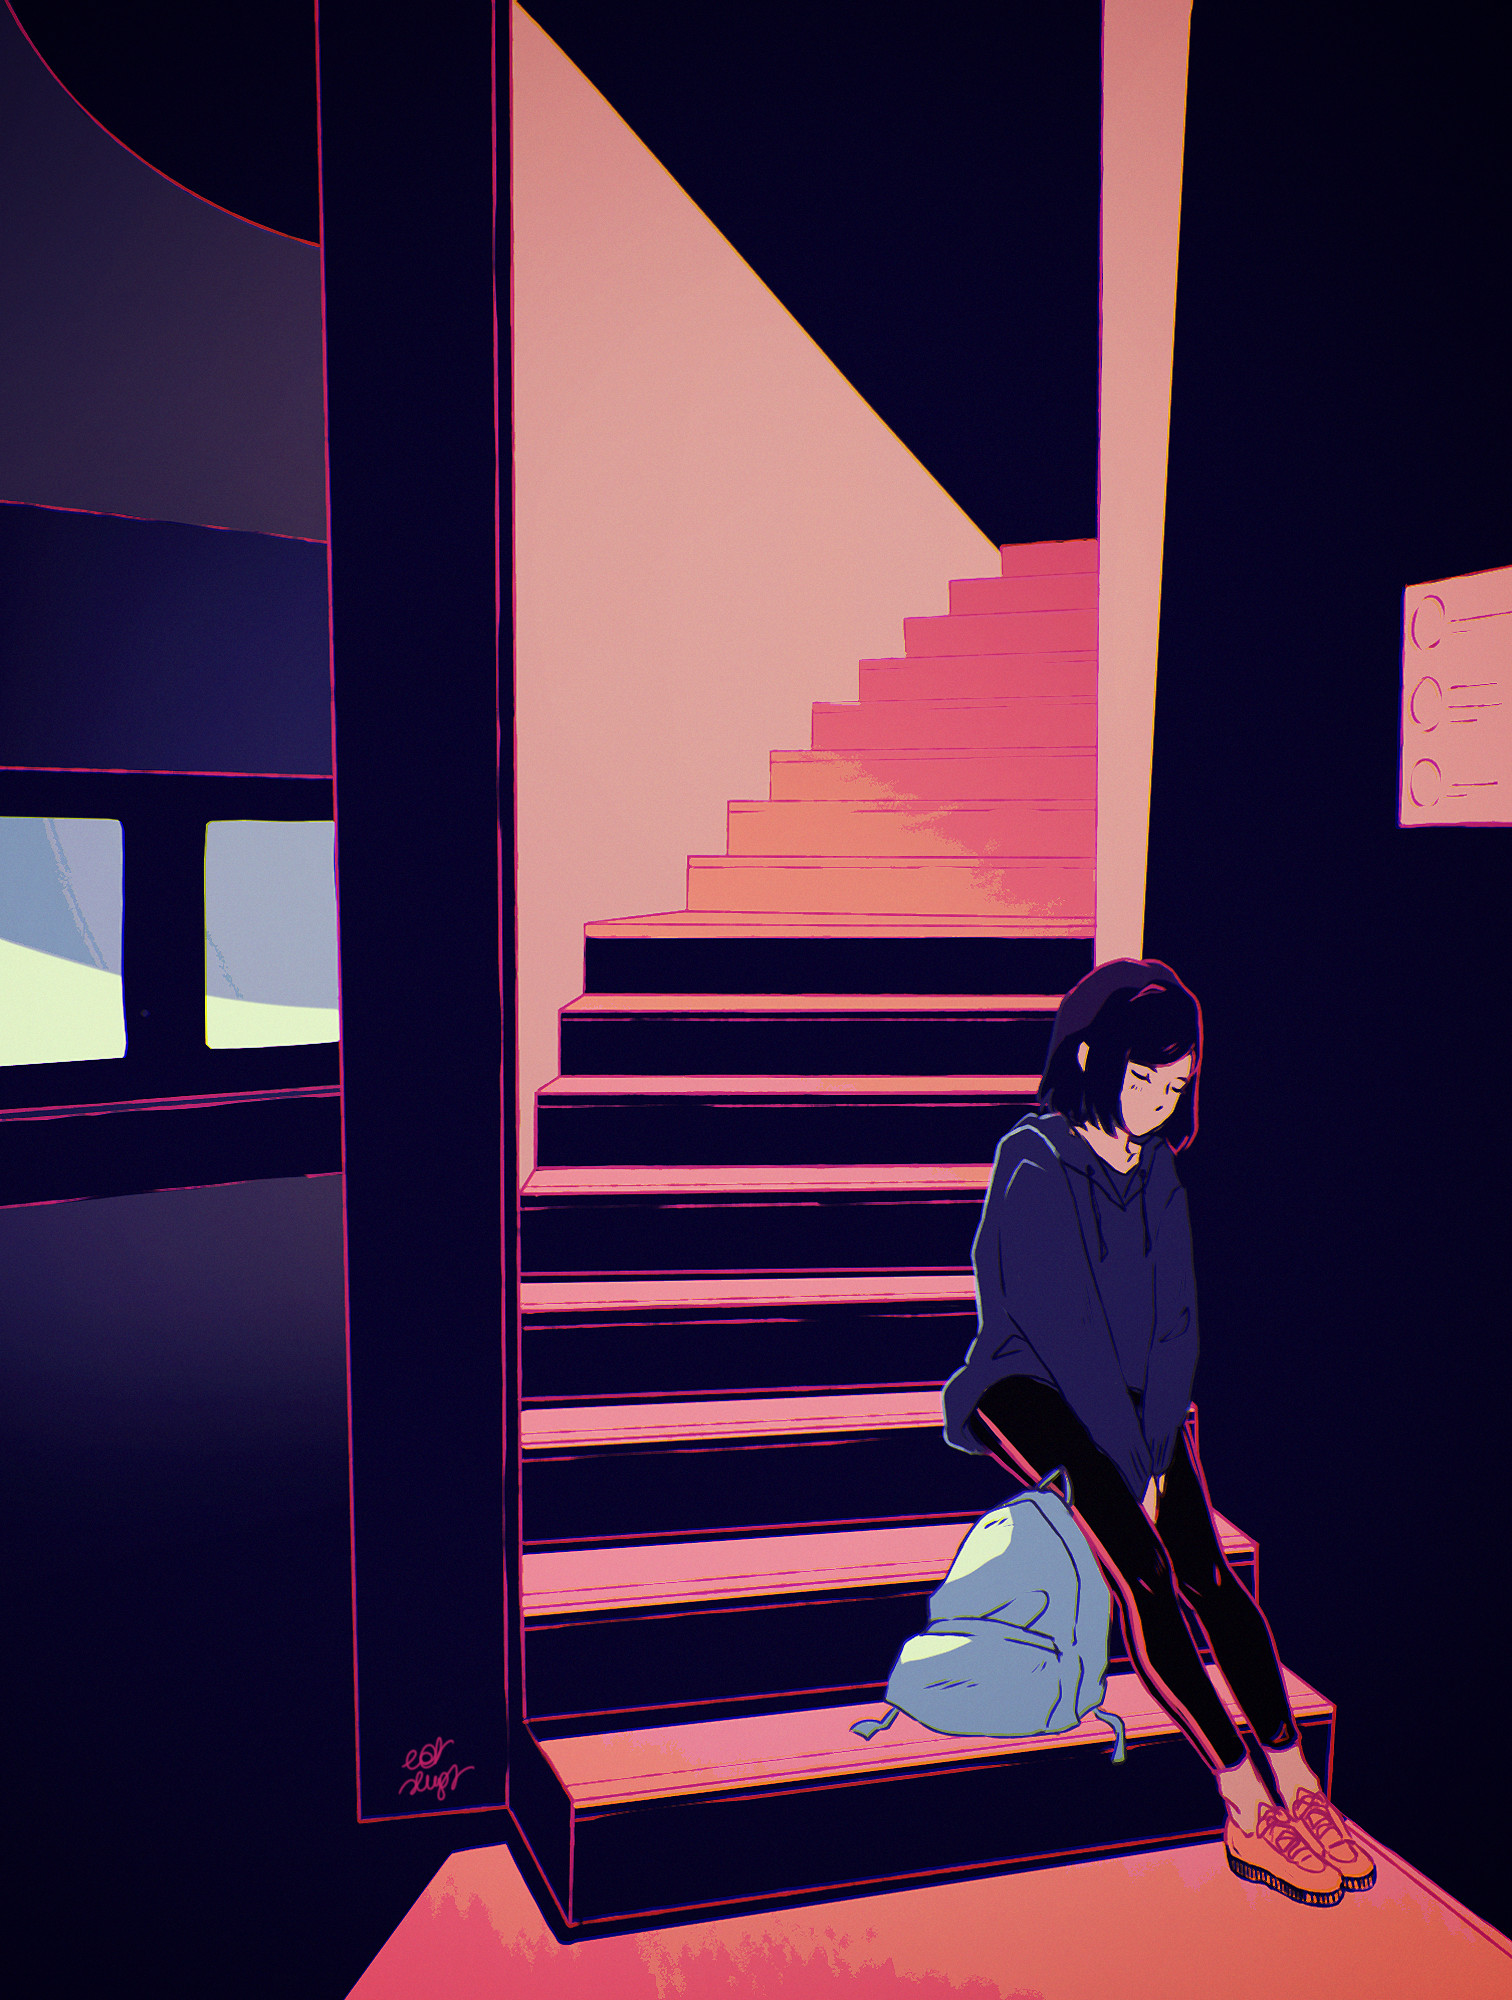 Sorrow stairs, girl, sadness, ladder 8k Backgrounds